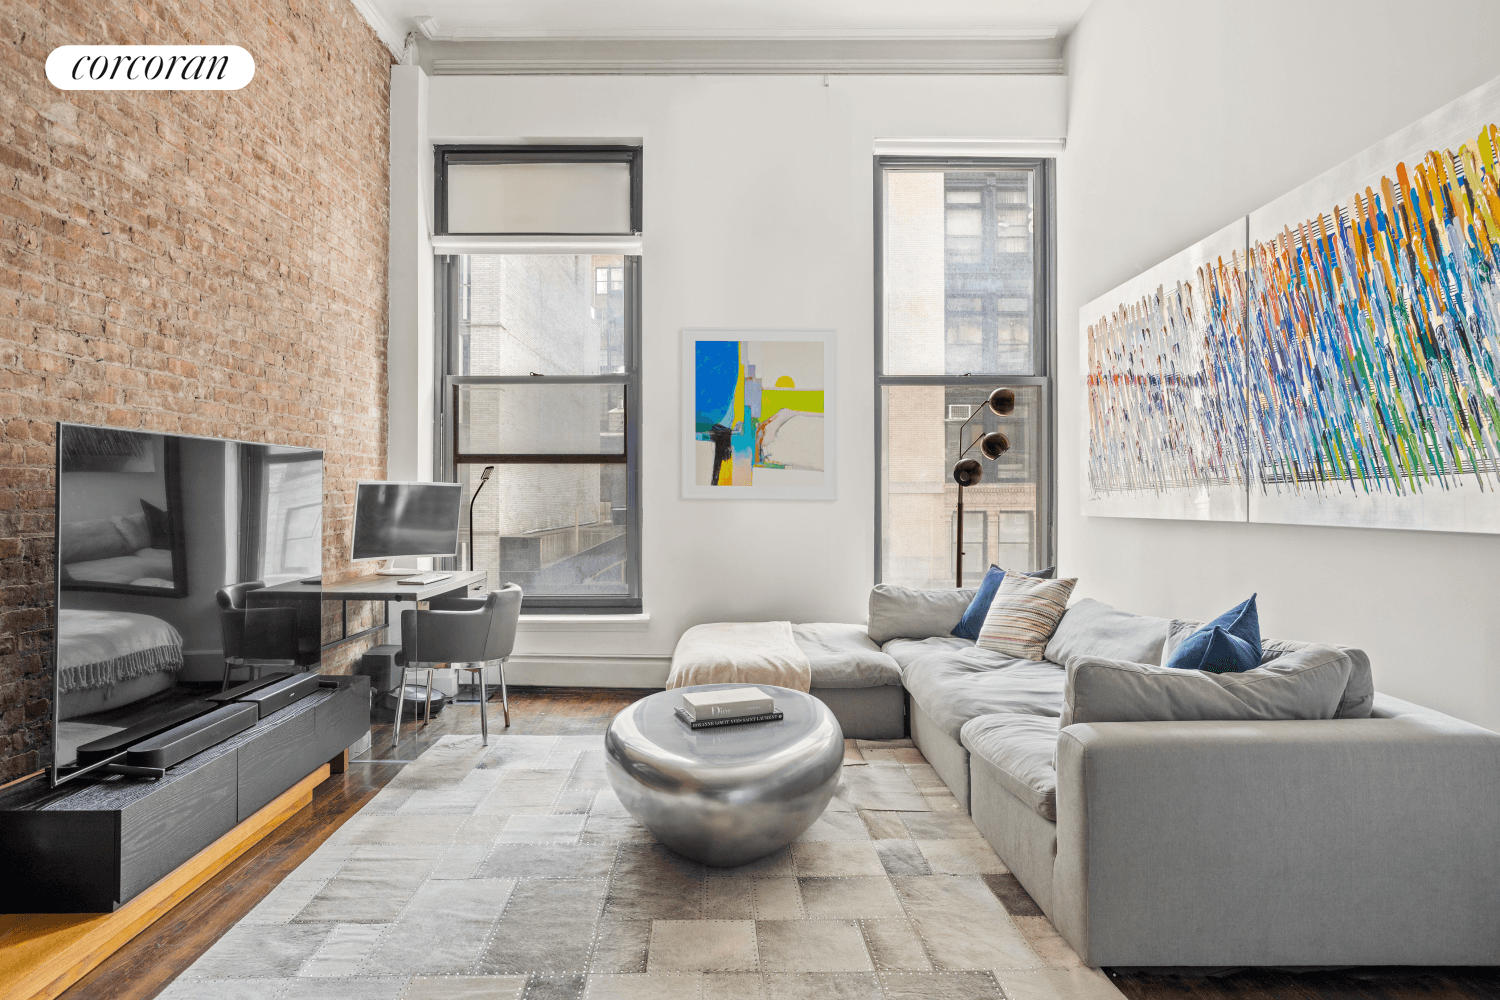 Pre war loft drama meets flawless craftsmanship and interior design at this glamorous residence with soaring 14 foot ceilings and exposed brick on the border of Greenwich Village and Noho.